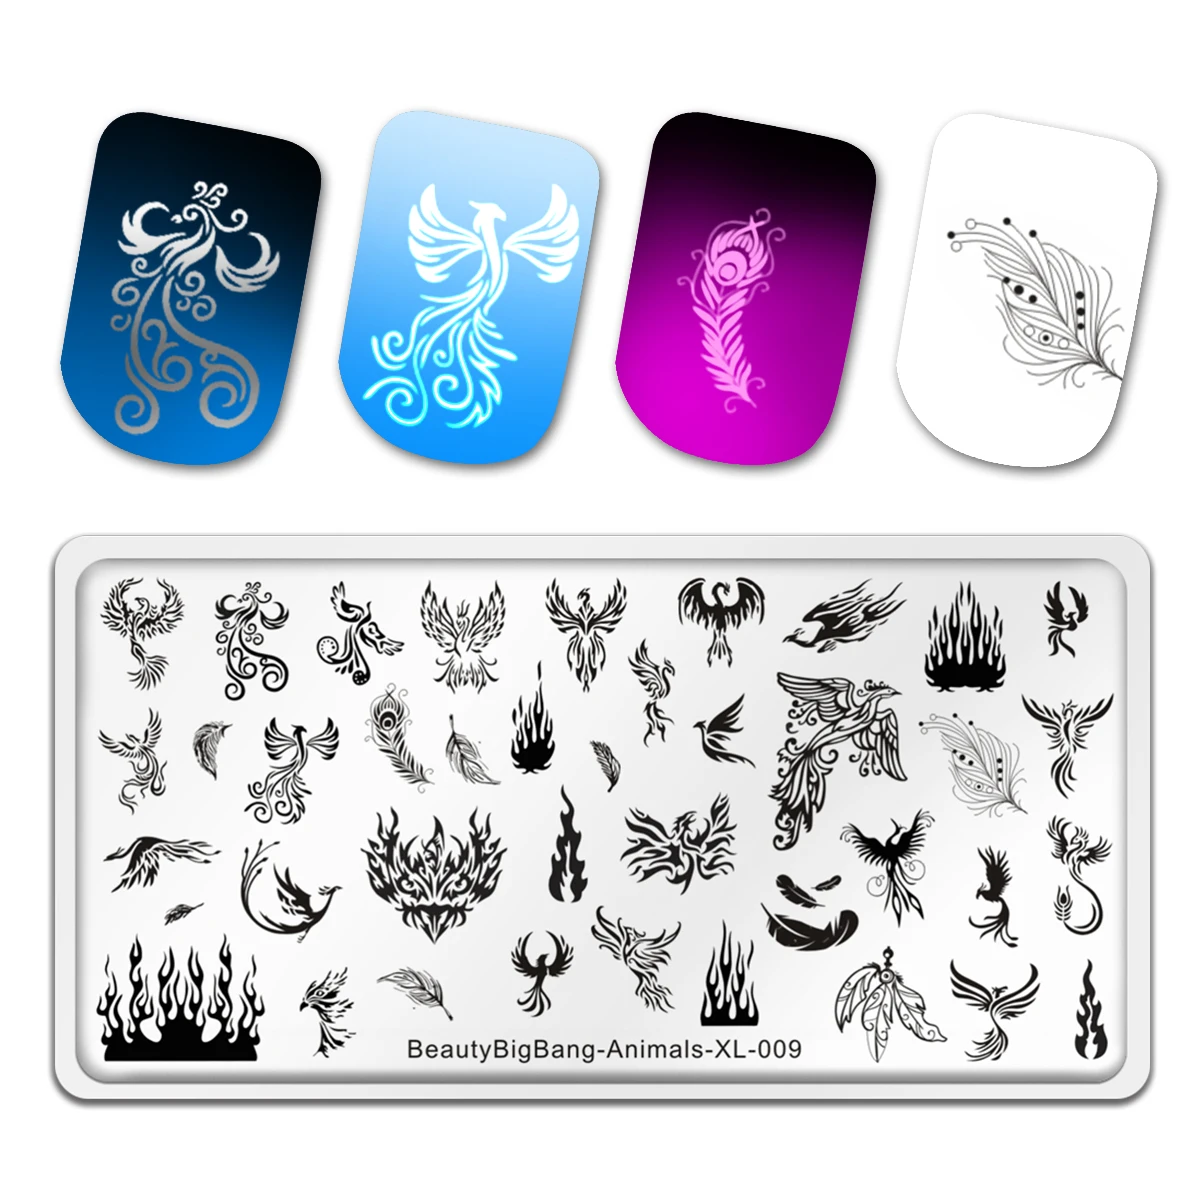 

Beautybigbang Stainless Steel Nail Art Template Stencil Tool Animal Style Phoenix Image Fire Birds Peacock Nail Stamping Plate